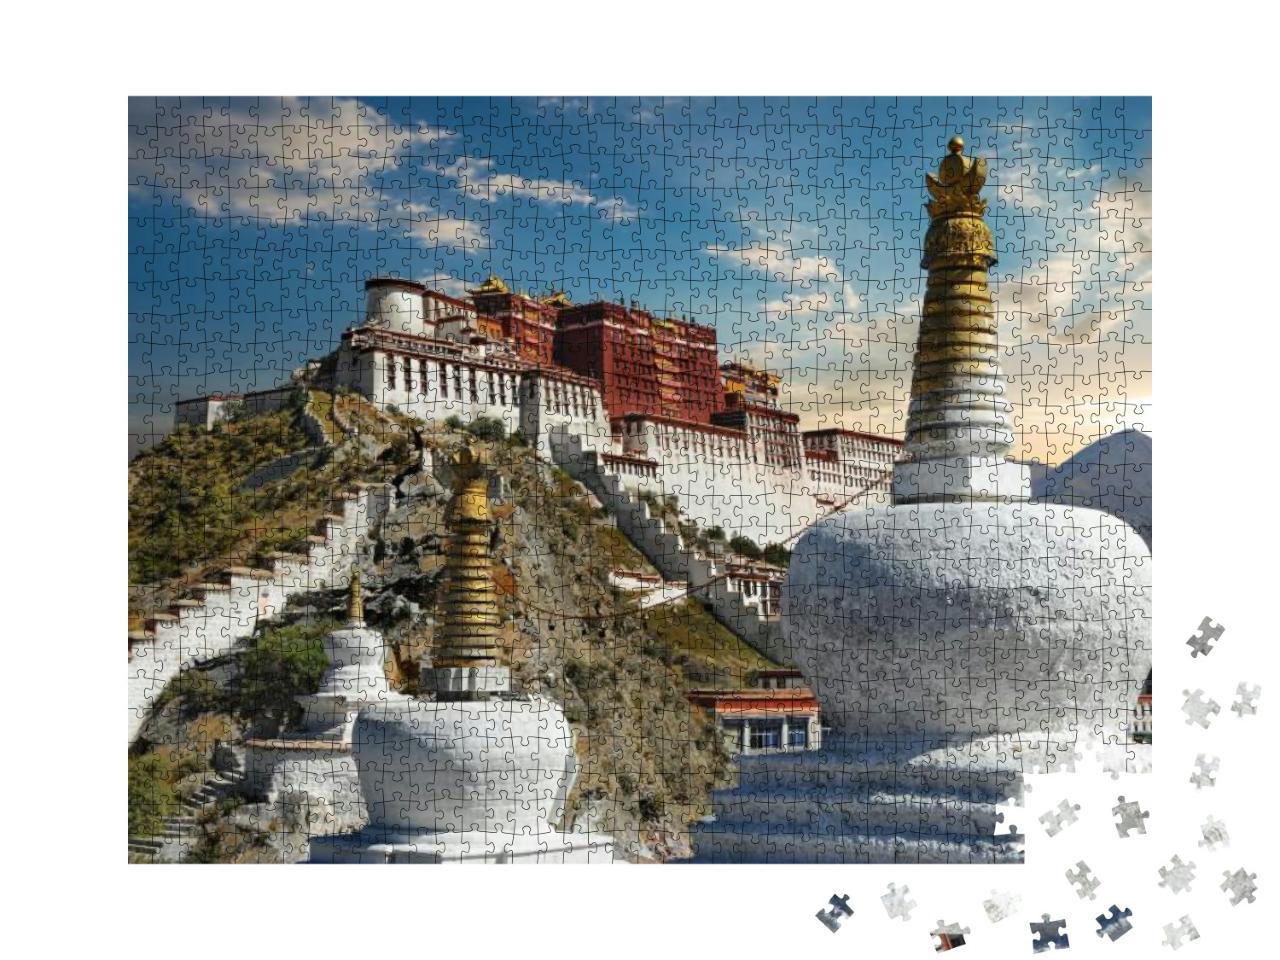 The Potala Palace in Lhasa - Tibet... Jigsaw Puzzle with 1000 pieces